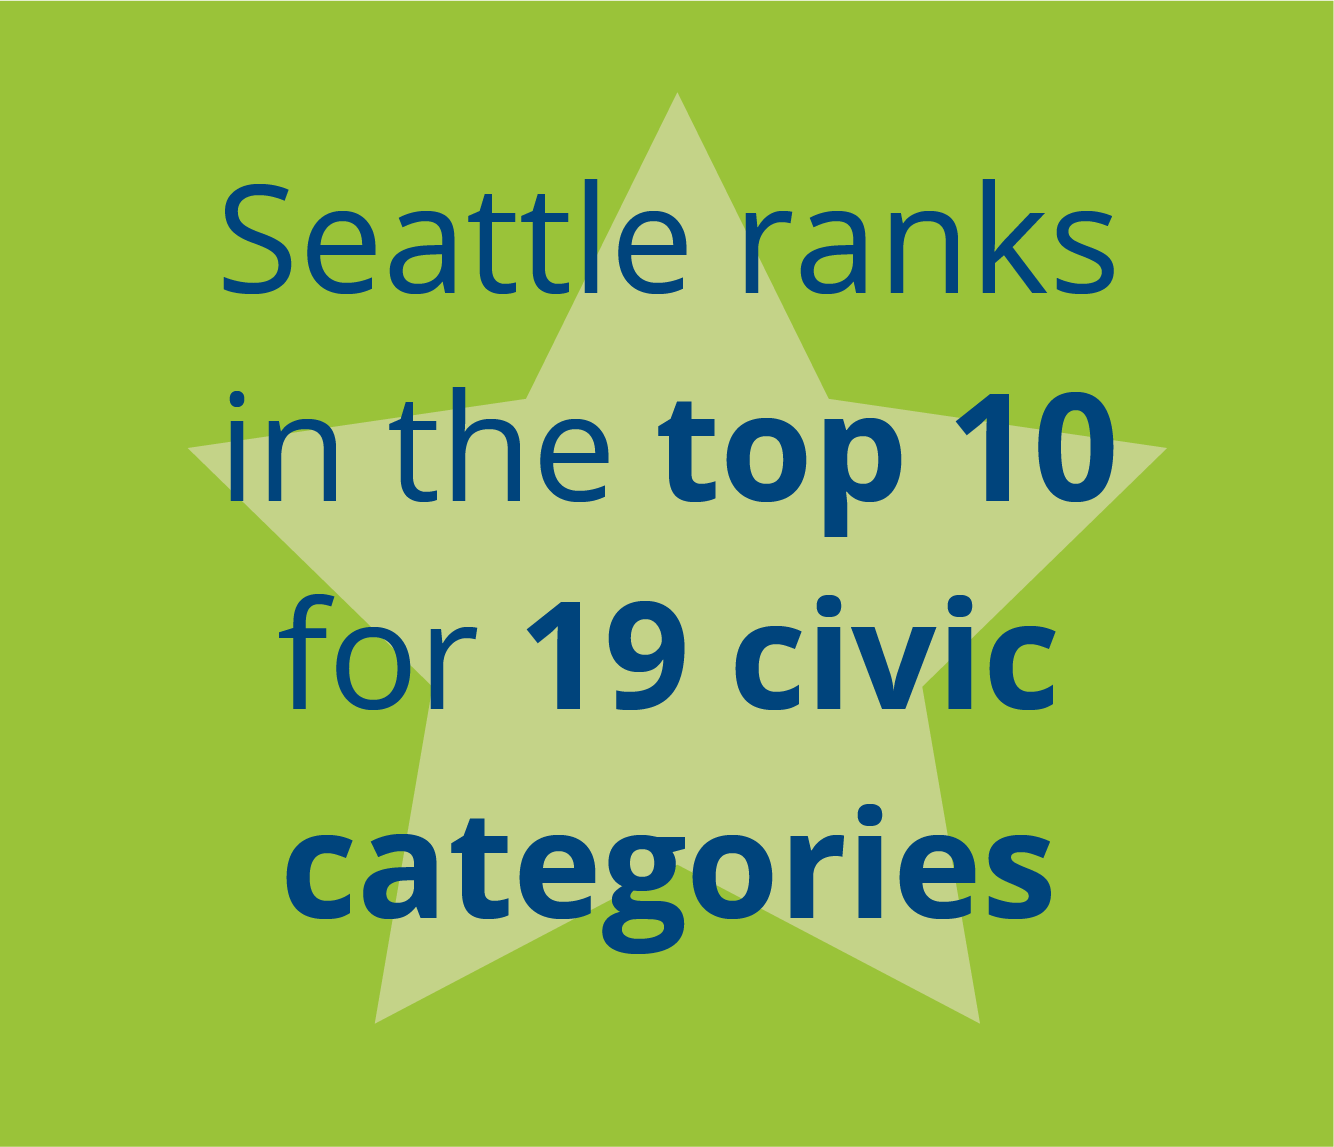 Seattle ranks in the top 10 for 19 civic categories